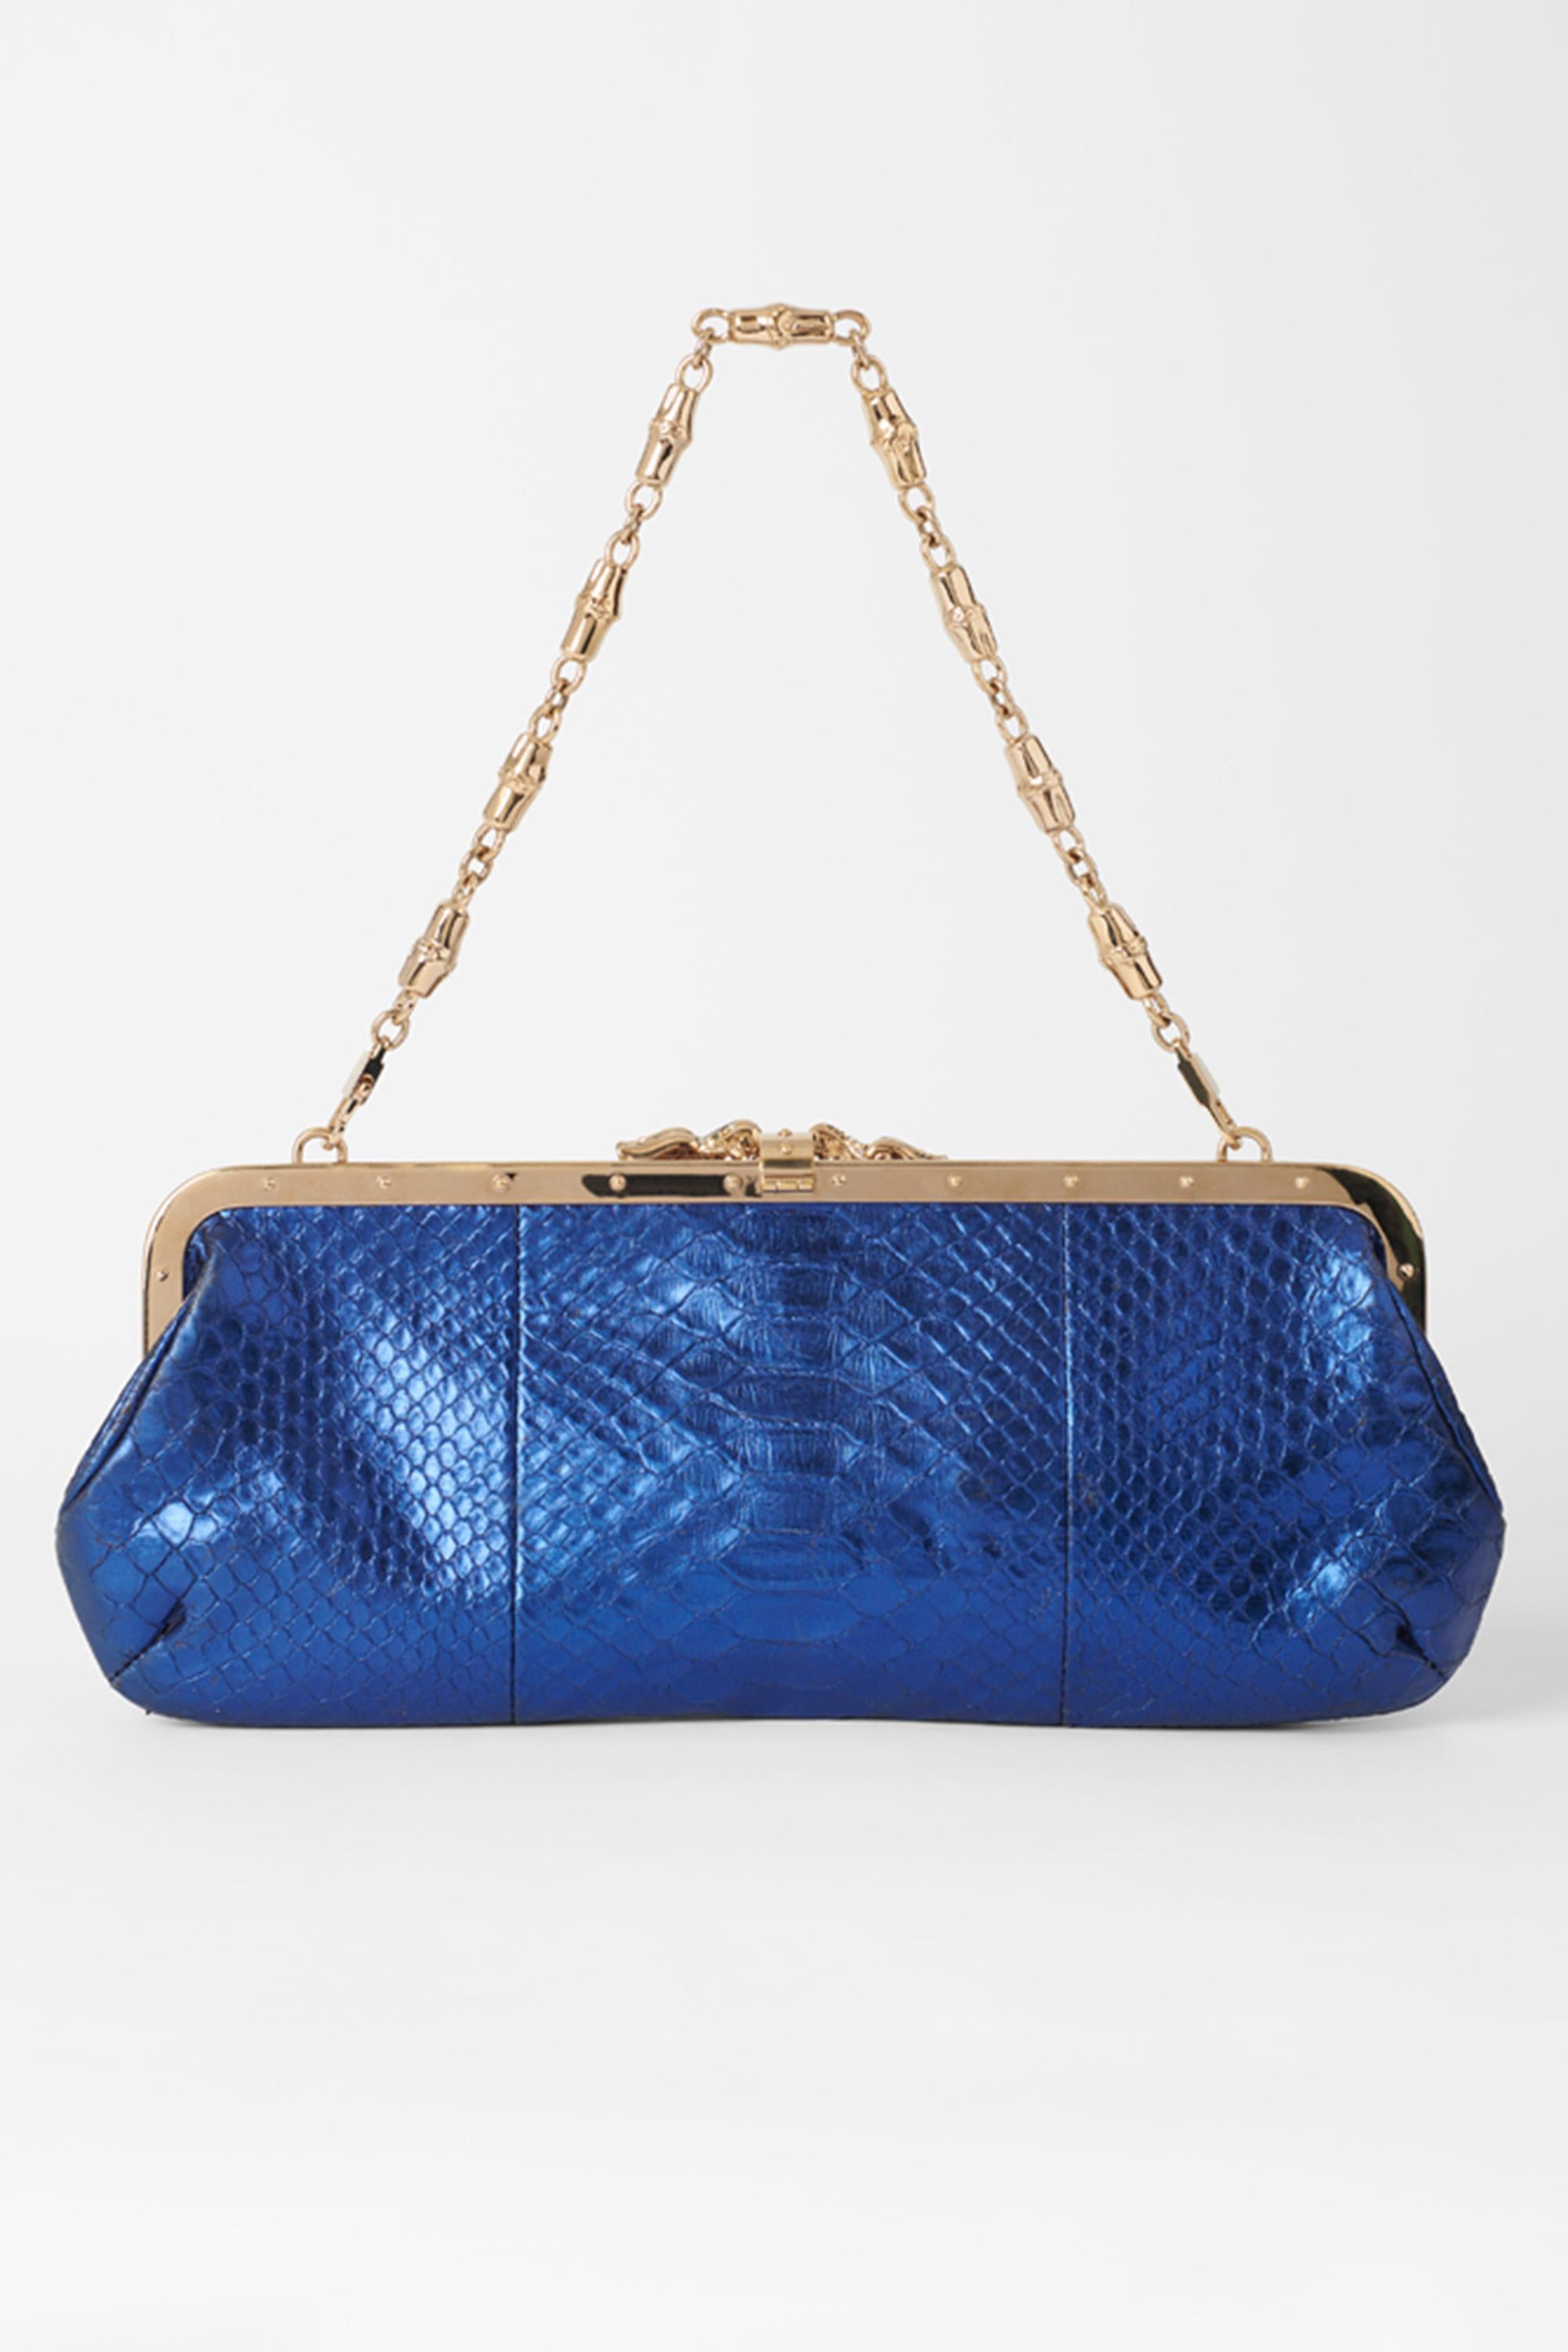 F/W 2004 Blue Iridescent Python Clutch In Good Condition For Sale In London, GB